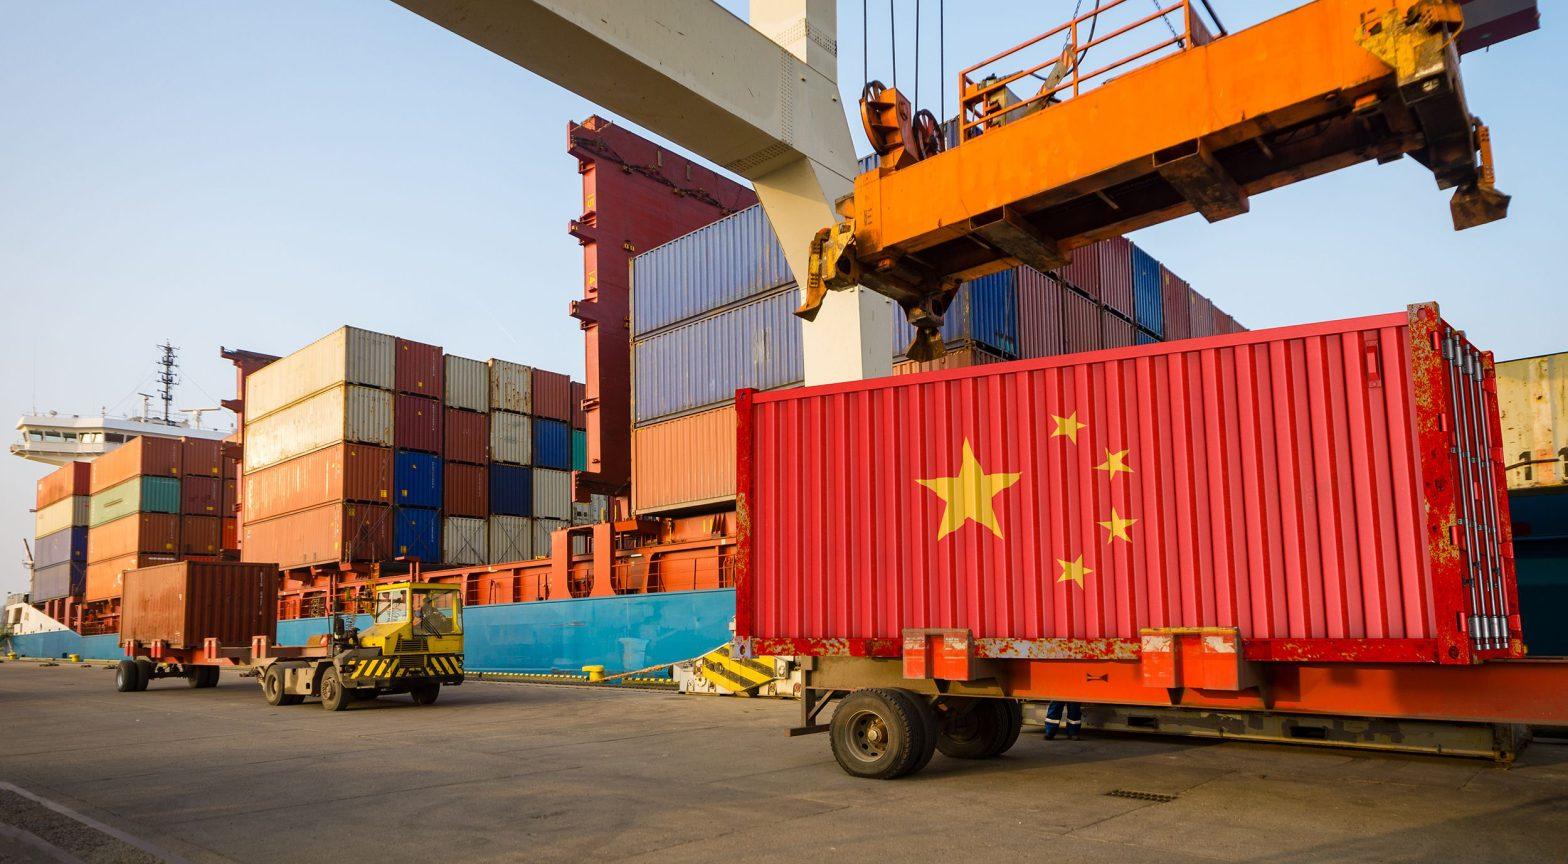 China's July Exports Experience Double-Digit Plunge, Adding Pressure to Bolster Ailing Economy